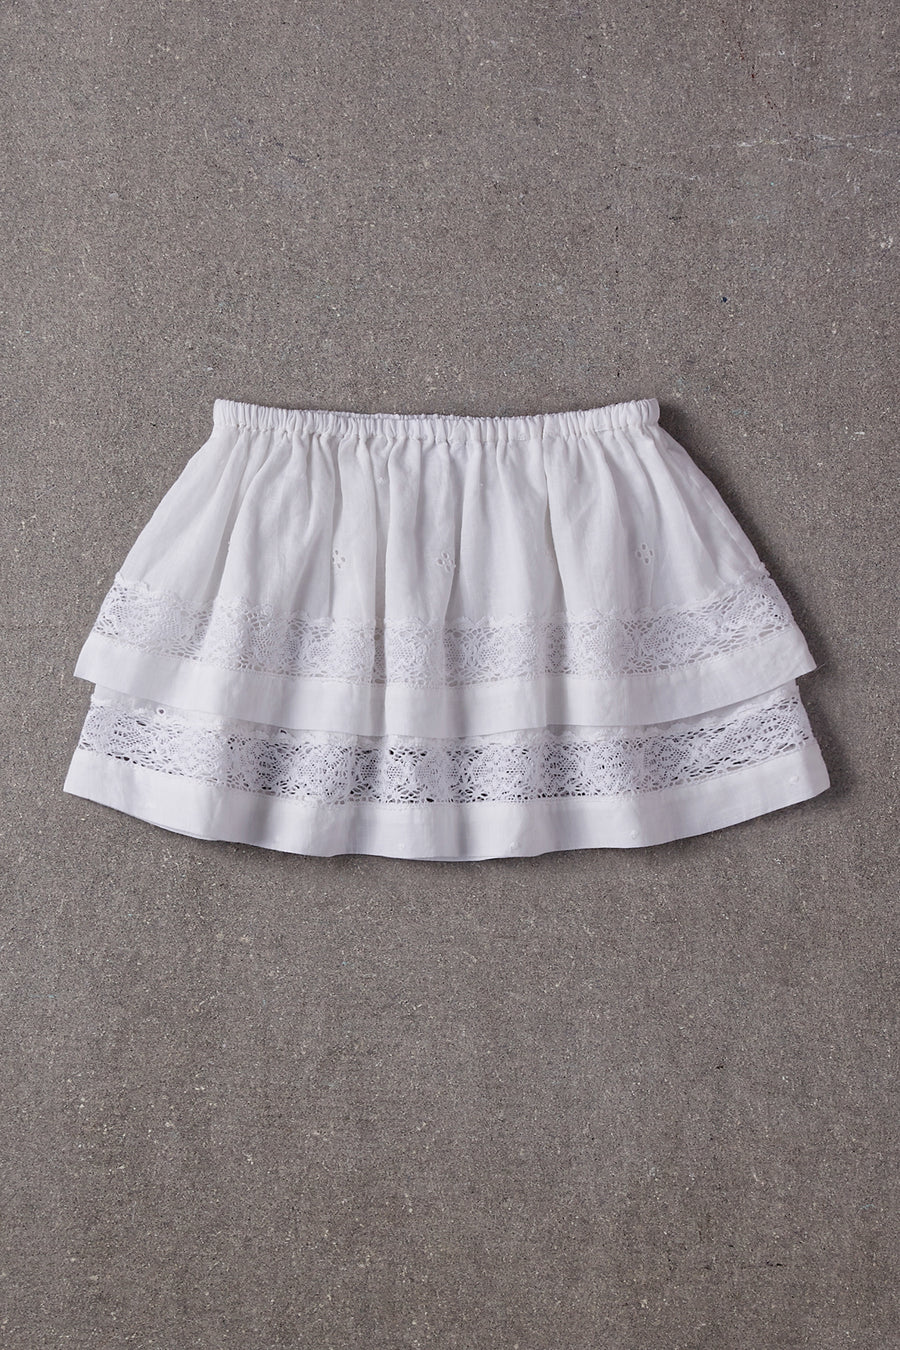 Girls Skirts | Kids Clothes - Mini Ruby Contemporary Childrenswear